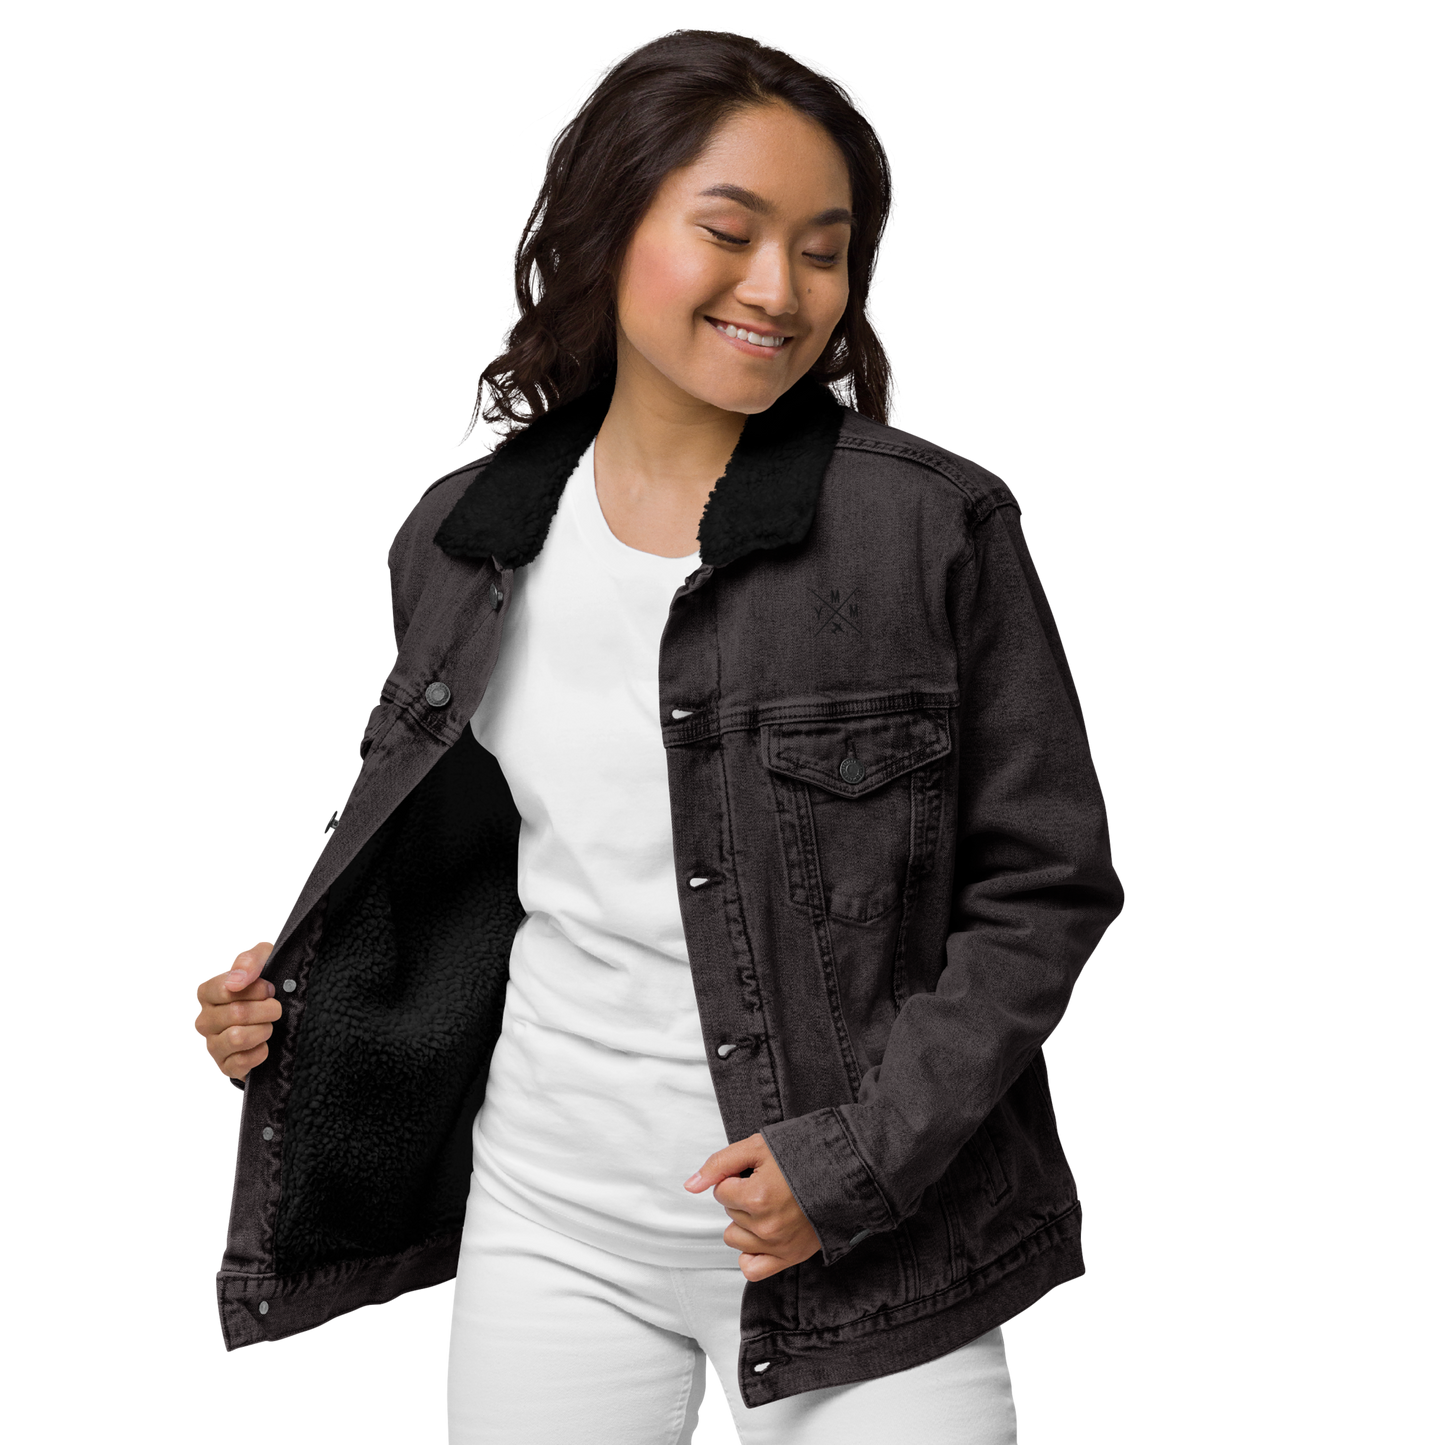 YHM Designs - YMM Fort McMurray Denim Sherpa Jacket - Crossed-X Design with Airport Code and Vintage Propliner - Black & White Embroidery - Image 05